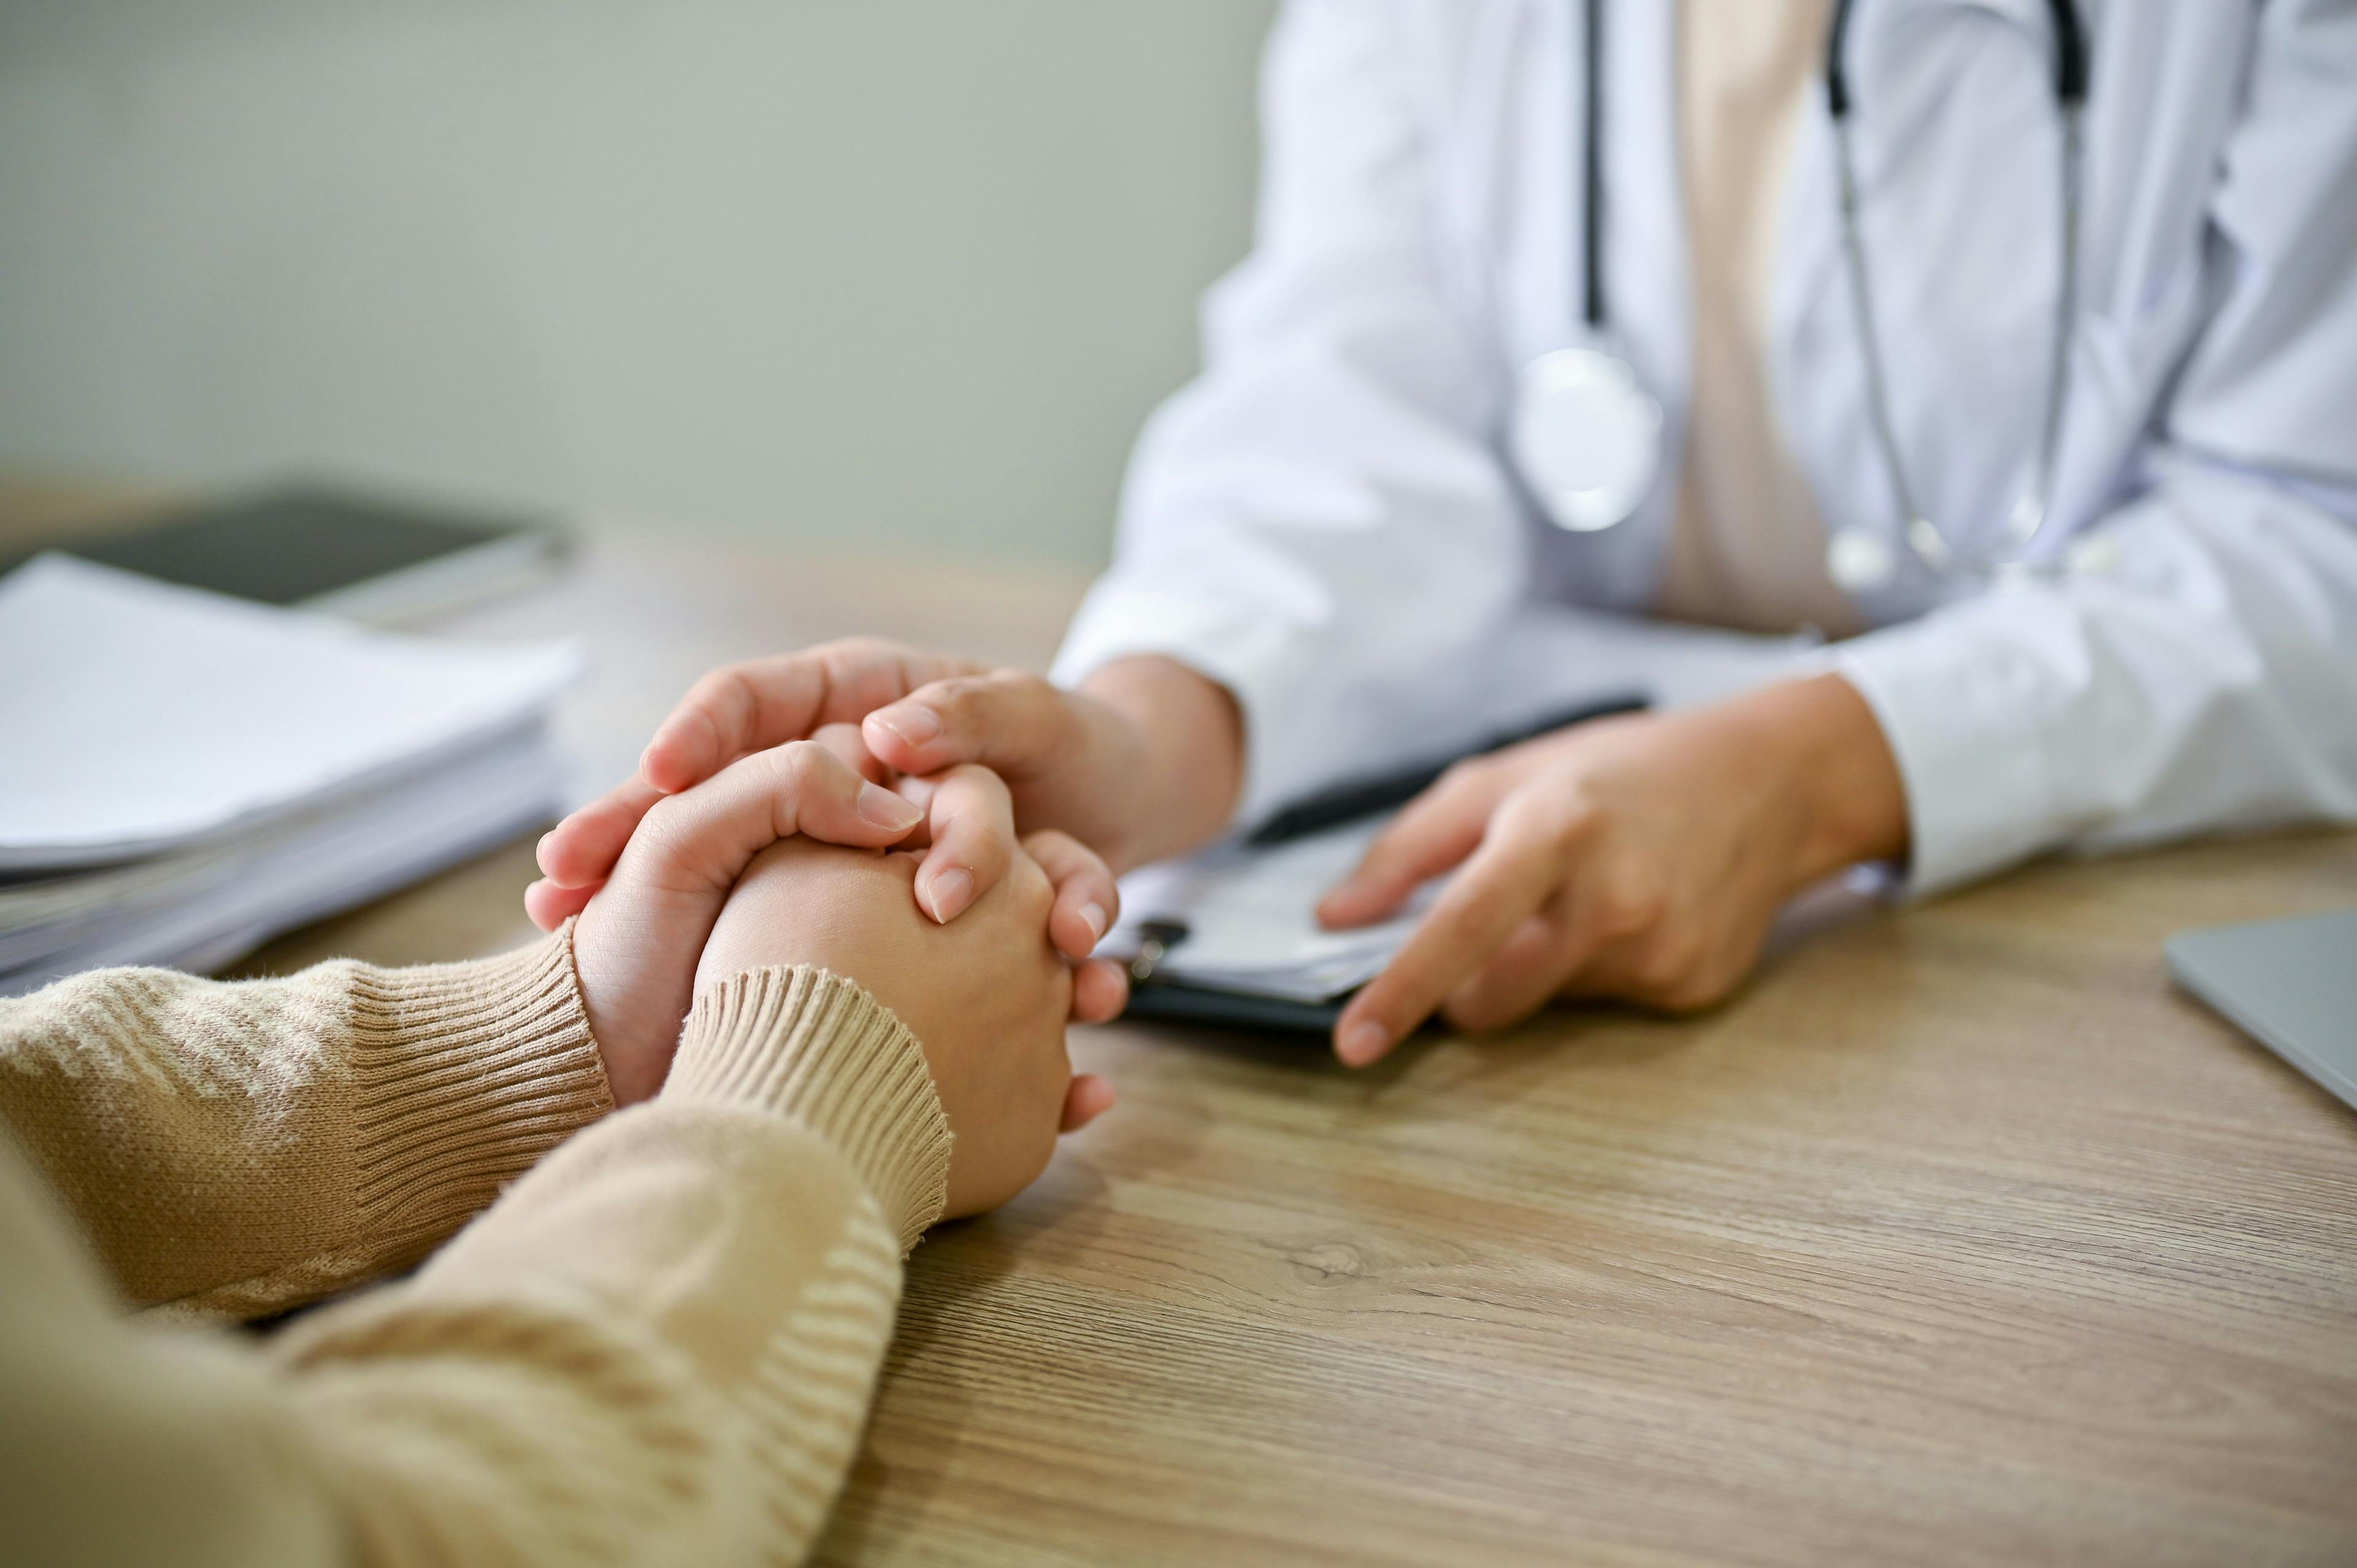 Close up view of doctor touching patient hand, showing empty and kindness- Image credit: Bongkarn | stock.adobe.com